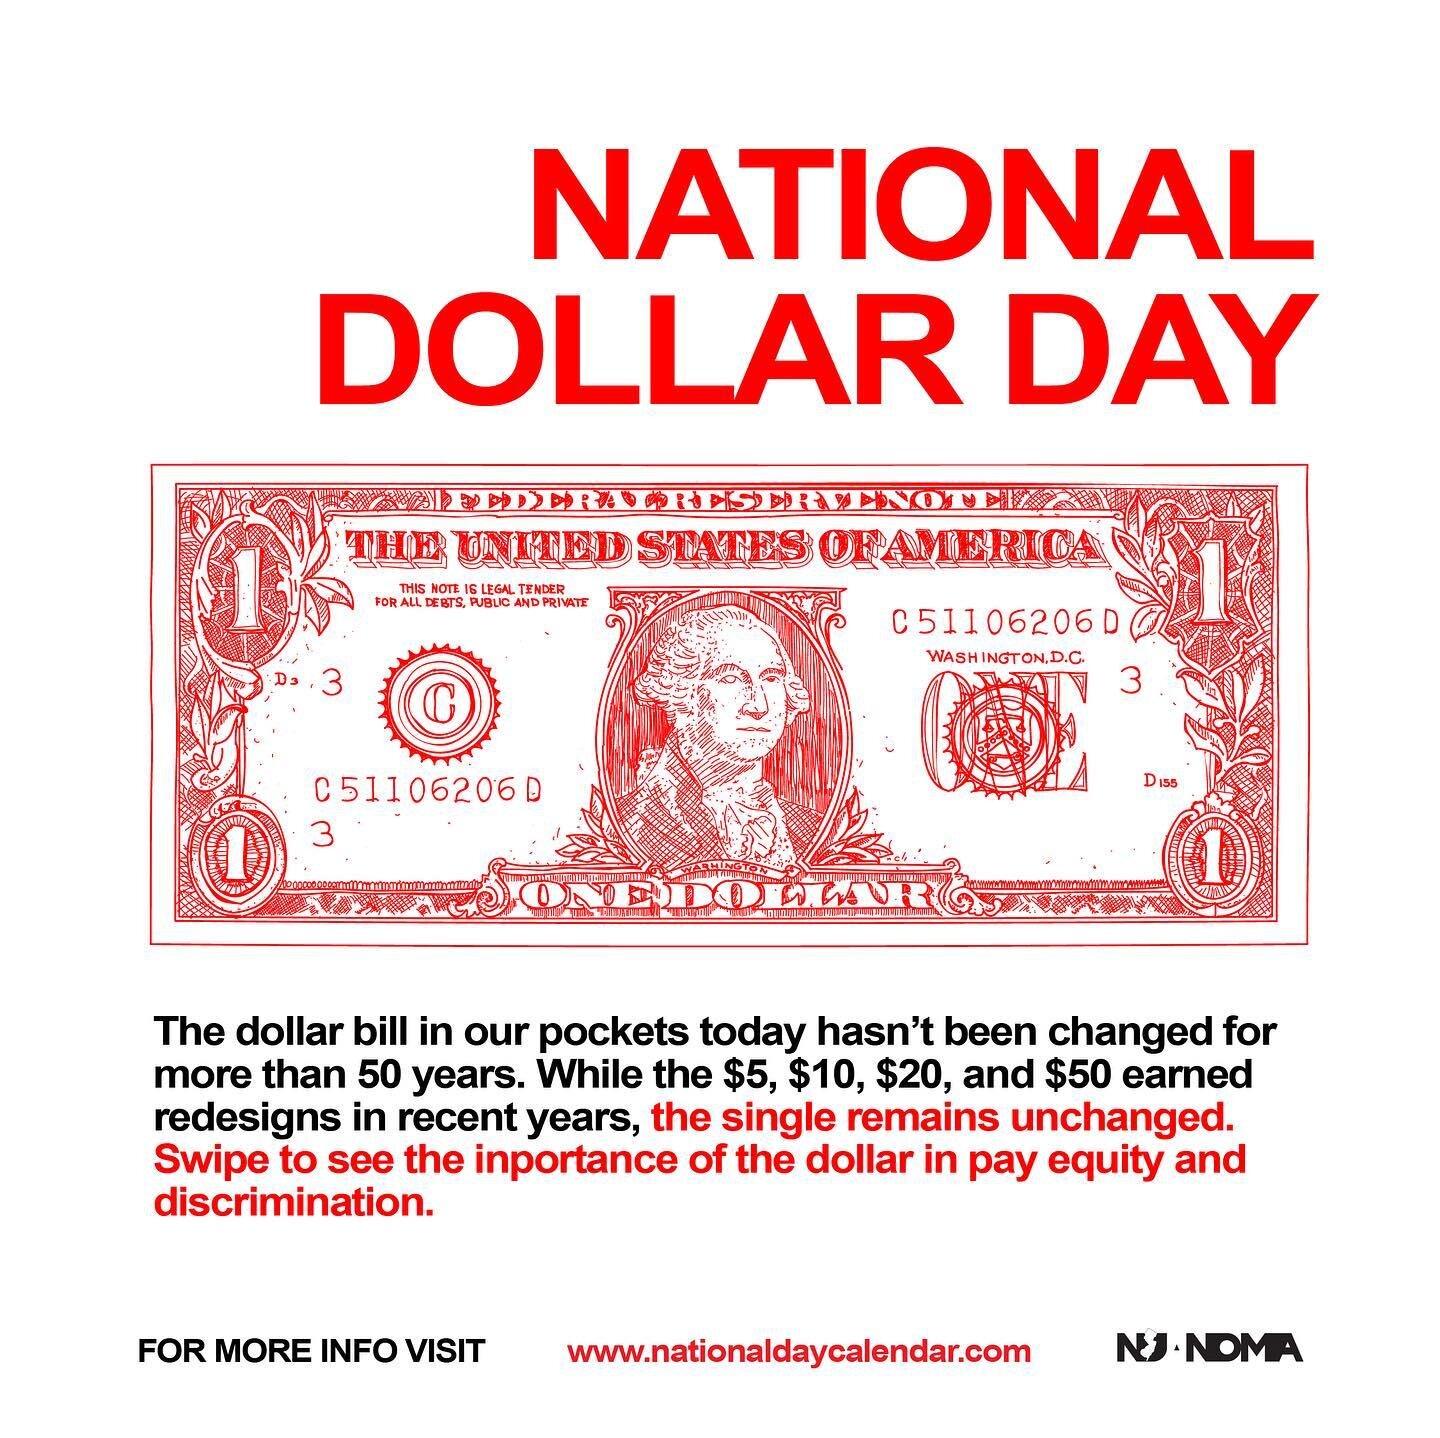 Today is national dollar day but do you know the importance of the dollar in pay equity? #NOMA #NJNOMA #NewJerseyNOMA #BlackArchitect #newjerseyarchitects #architecture #architect #newjersey #NJ #NationalDollarDay #Dollar